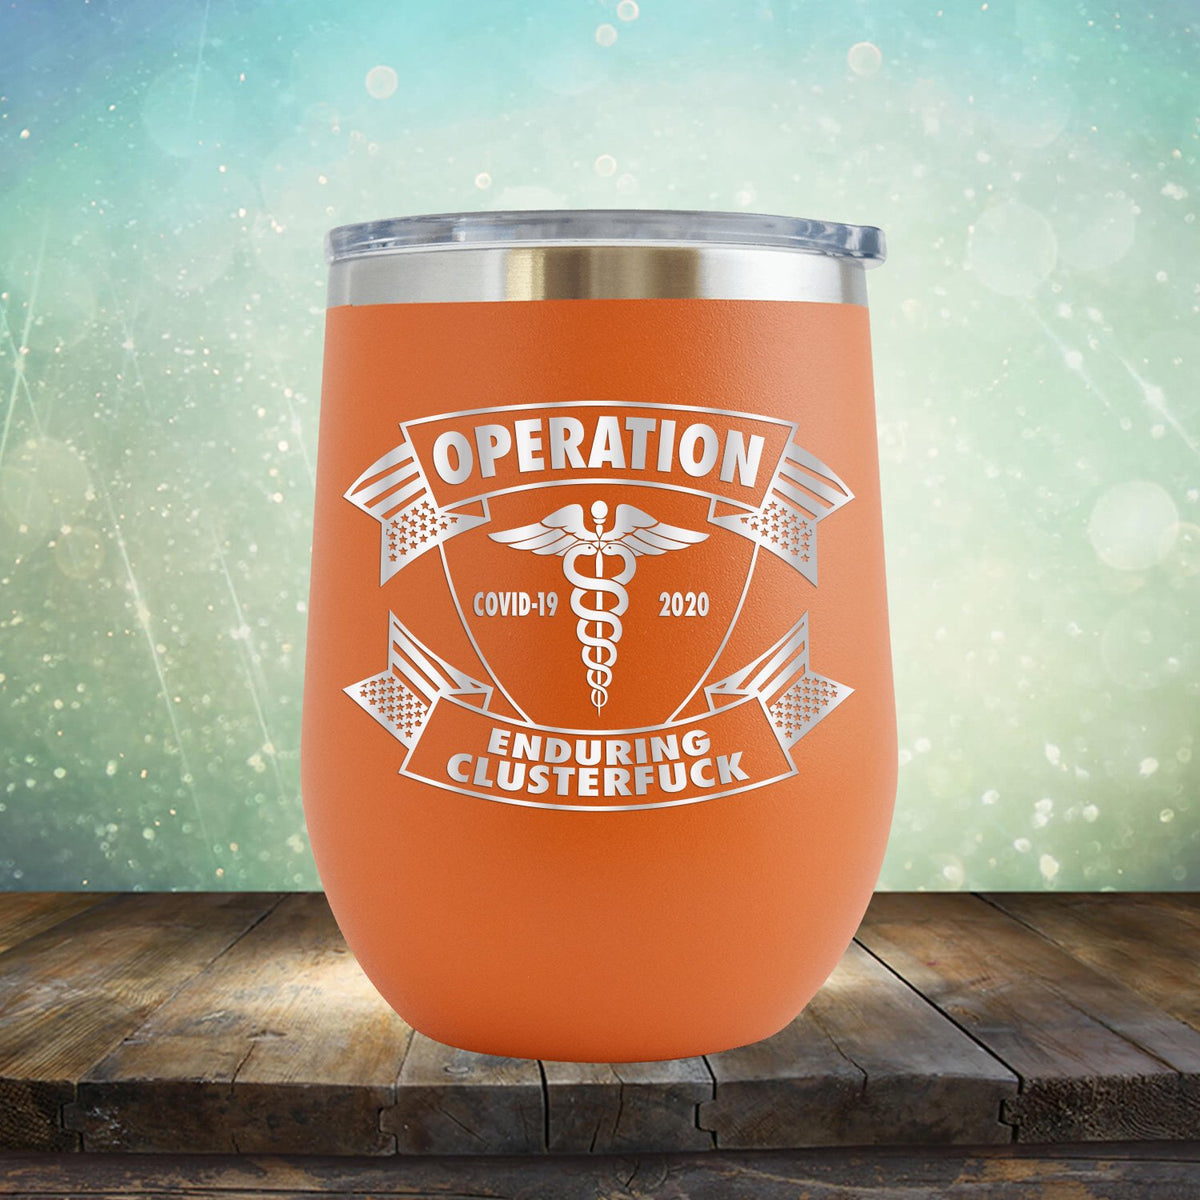 Operation Covid-19 2020 Enduring Clusterfuck - Stemless Wine Cup